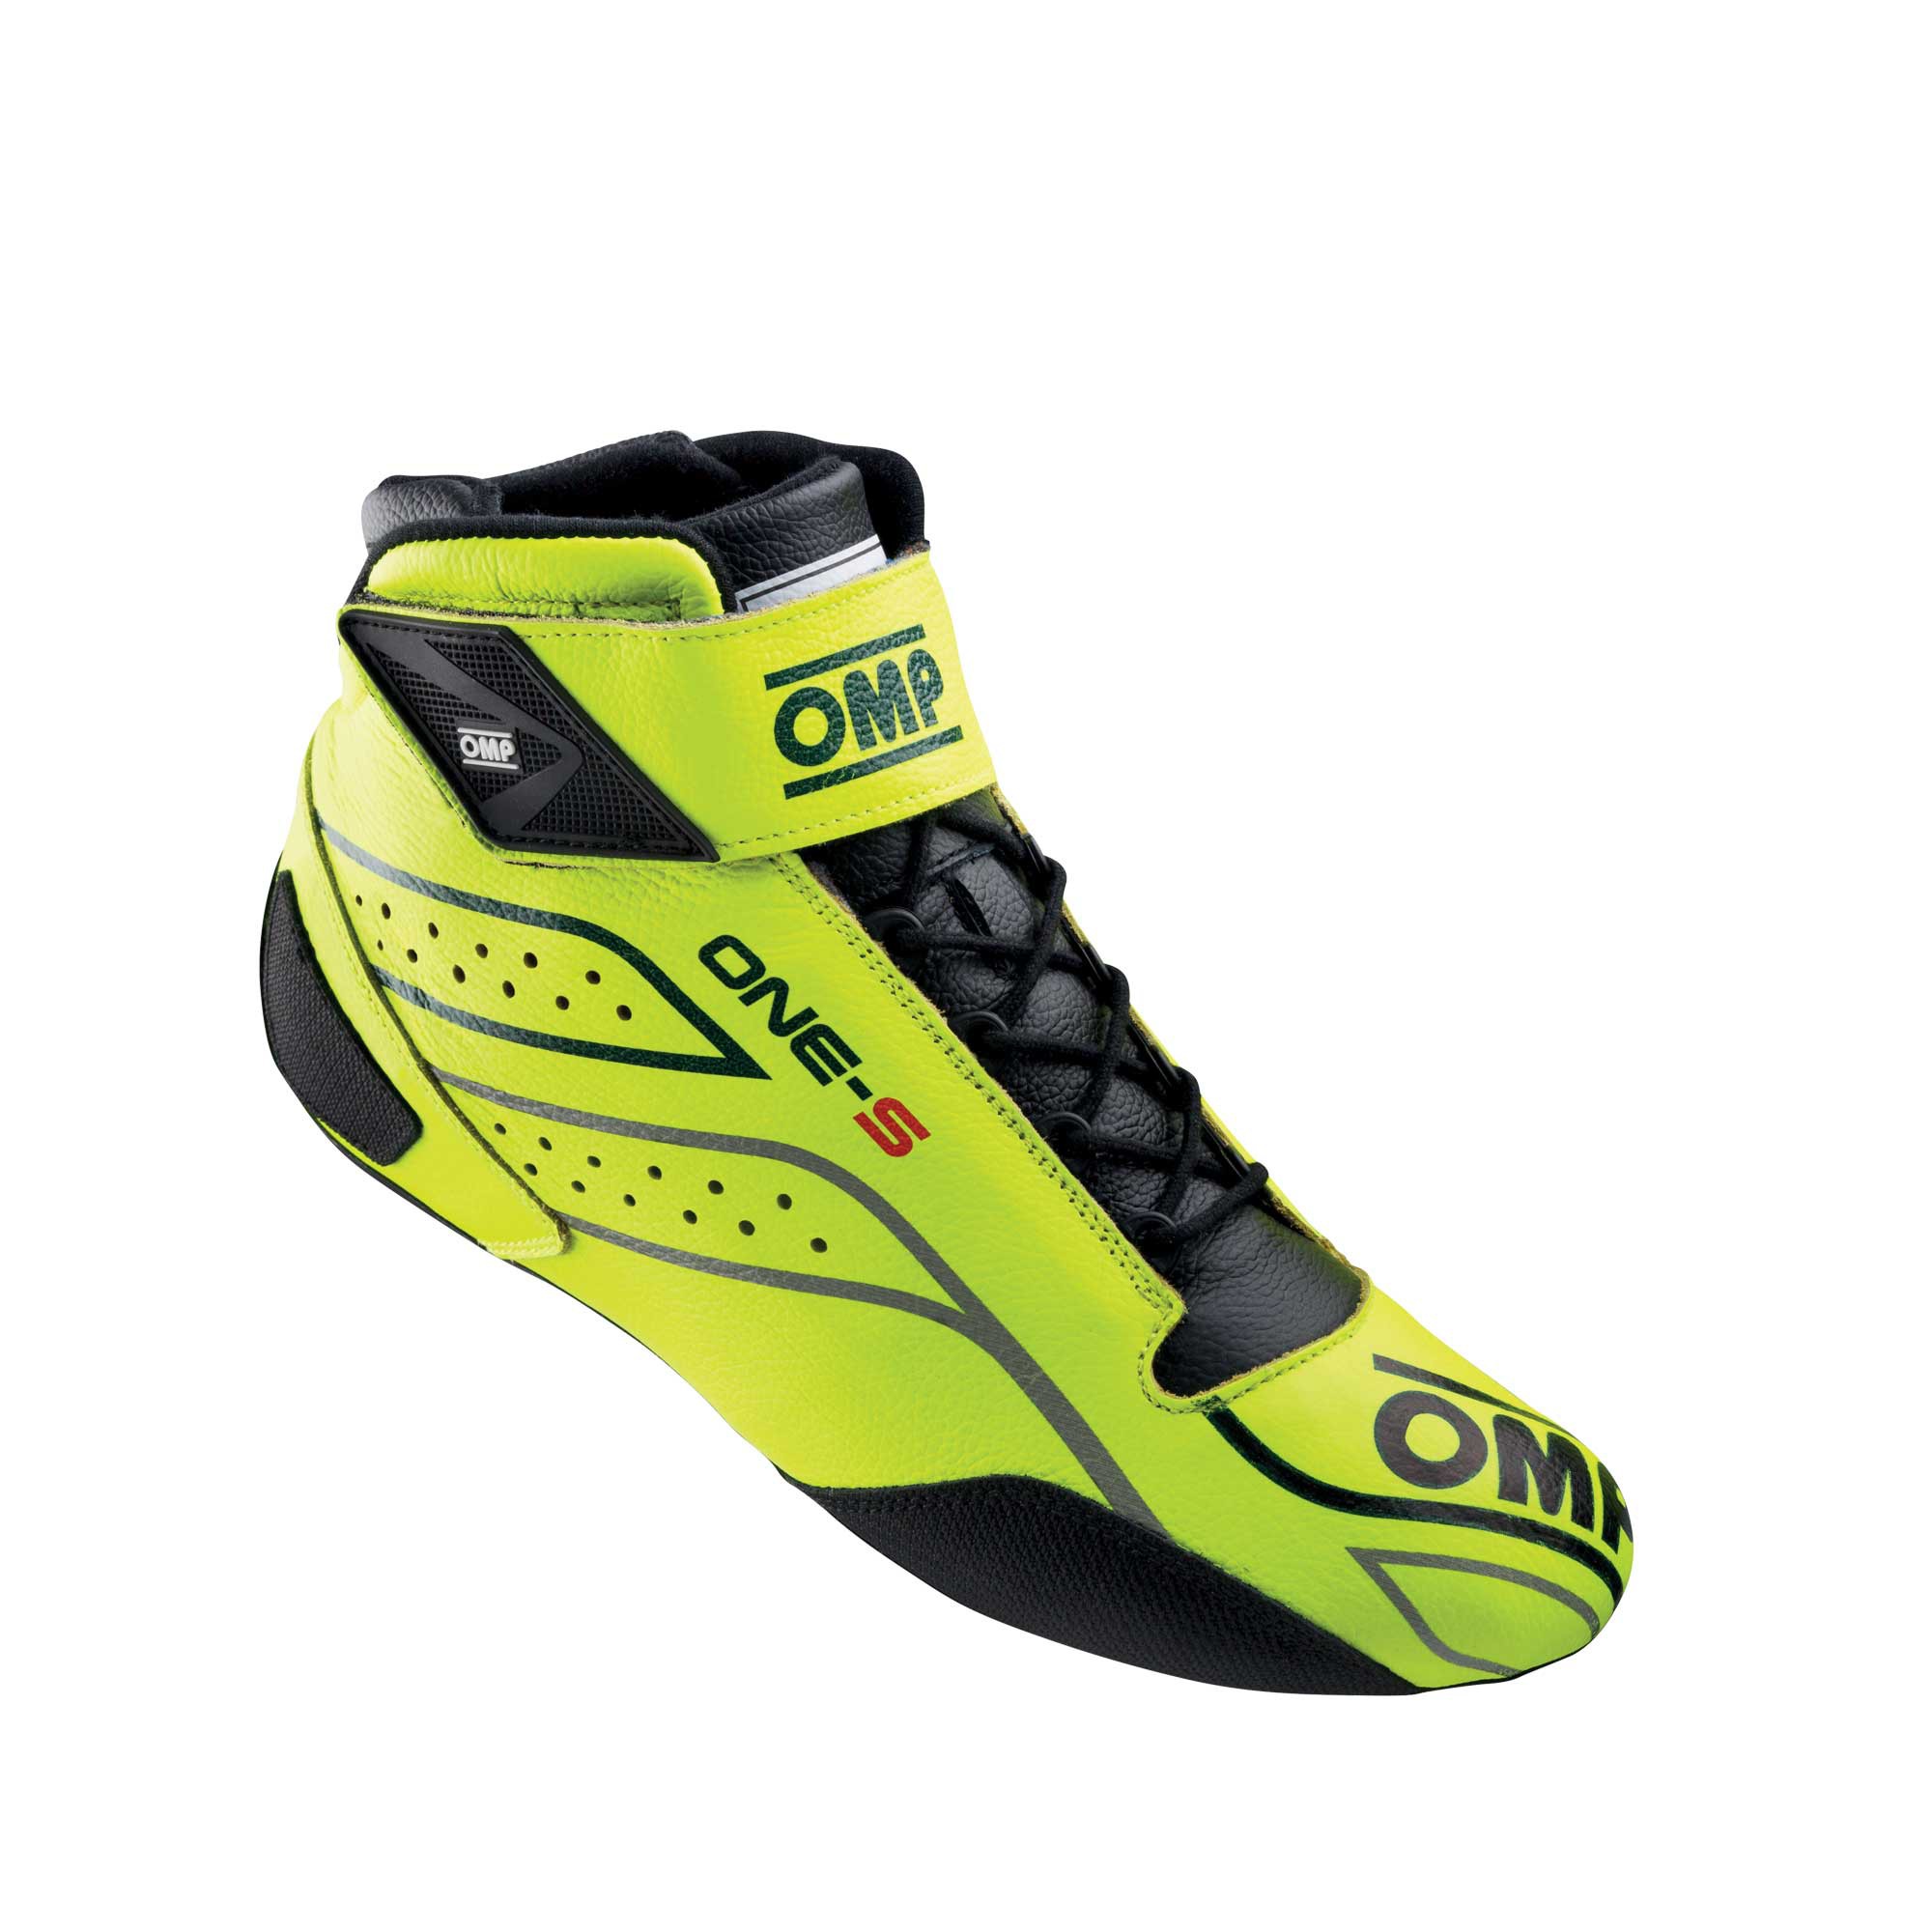 ONE-S SHOES FLUO YELLOW SIZE 37 FIA 8856-2018